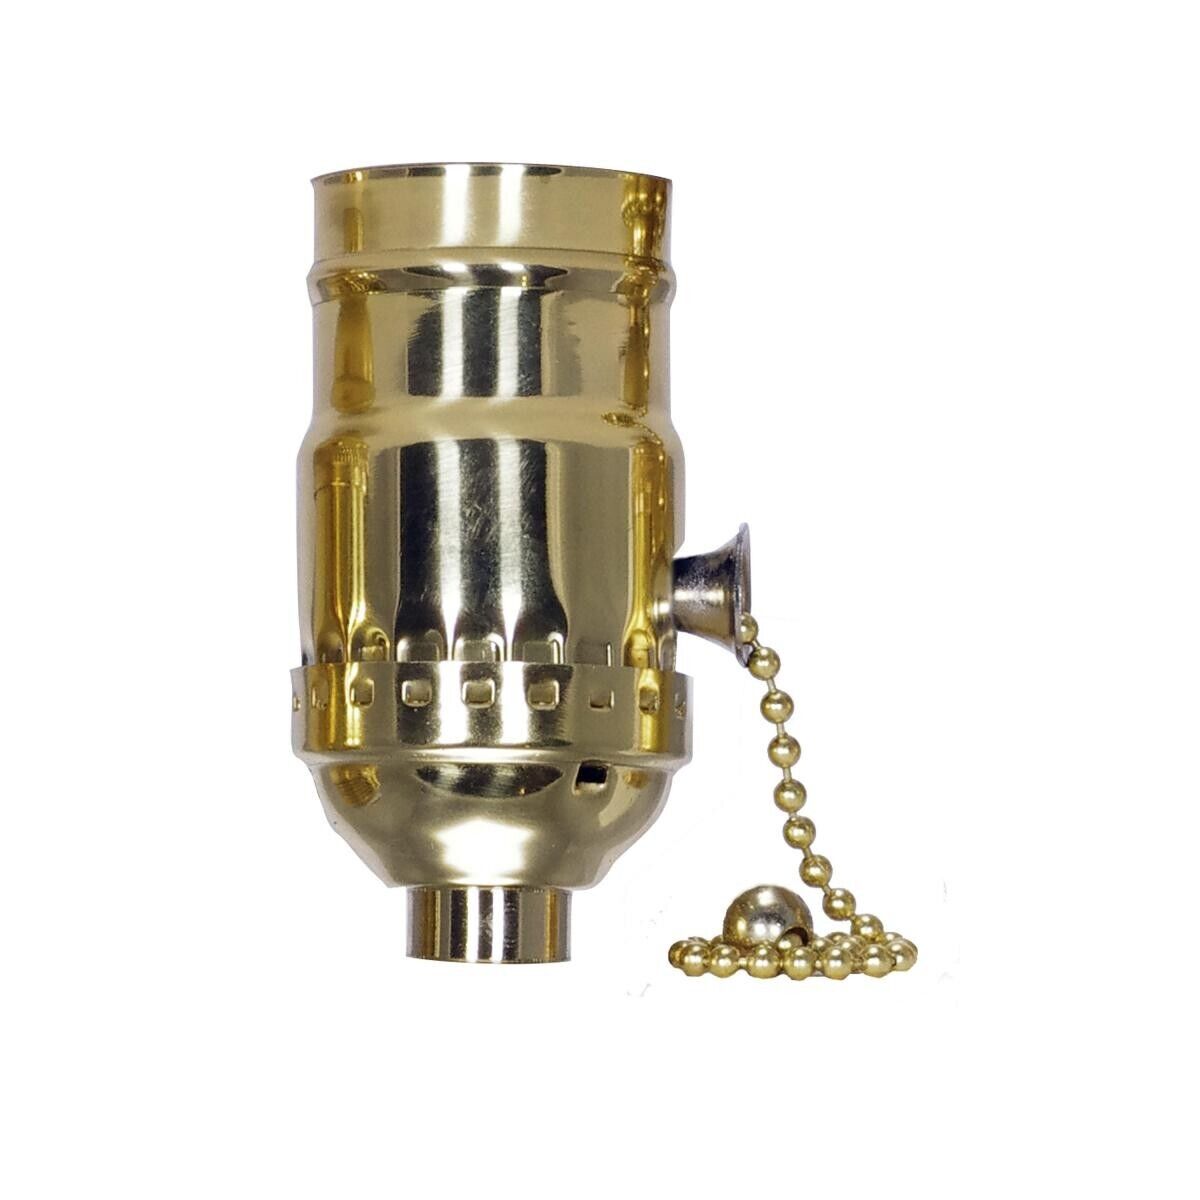 SOLID BRASS PULL-CHAIN SOCKET